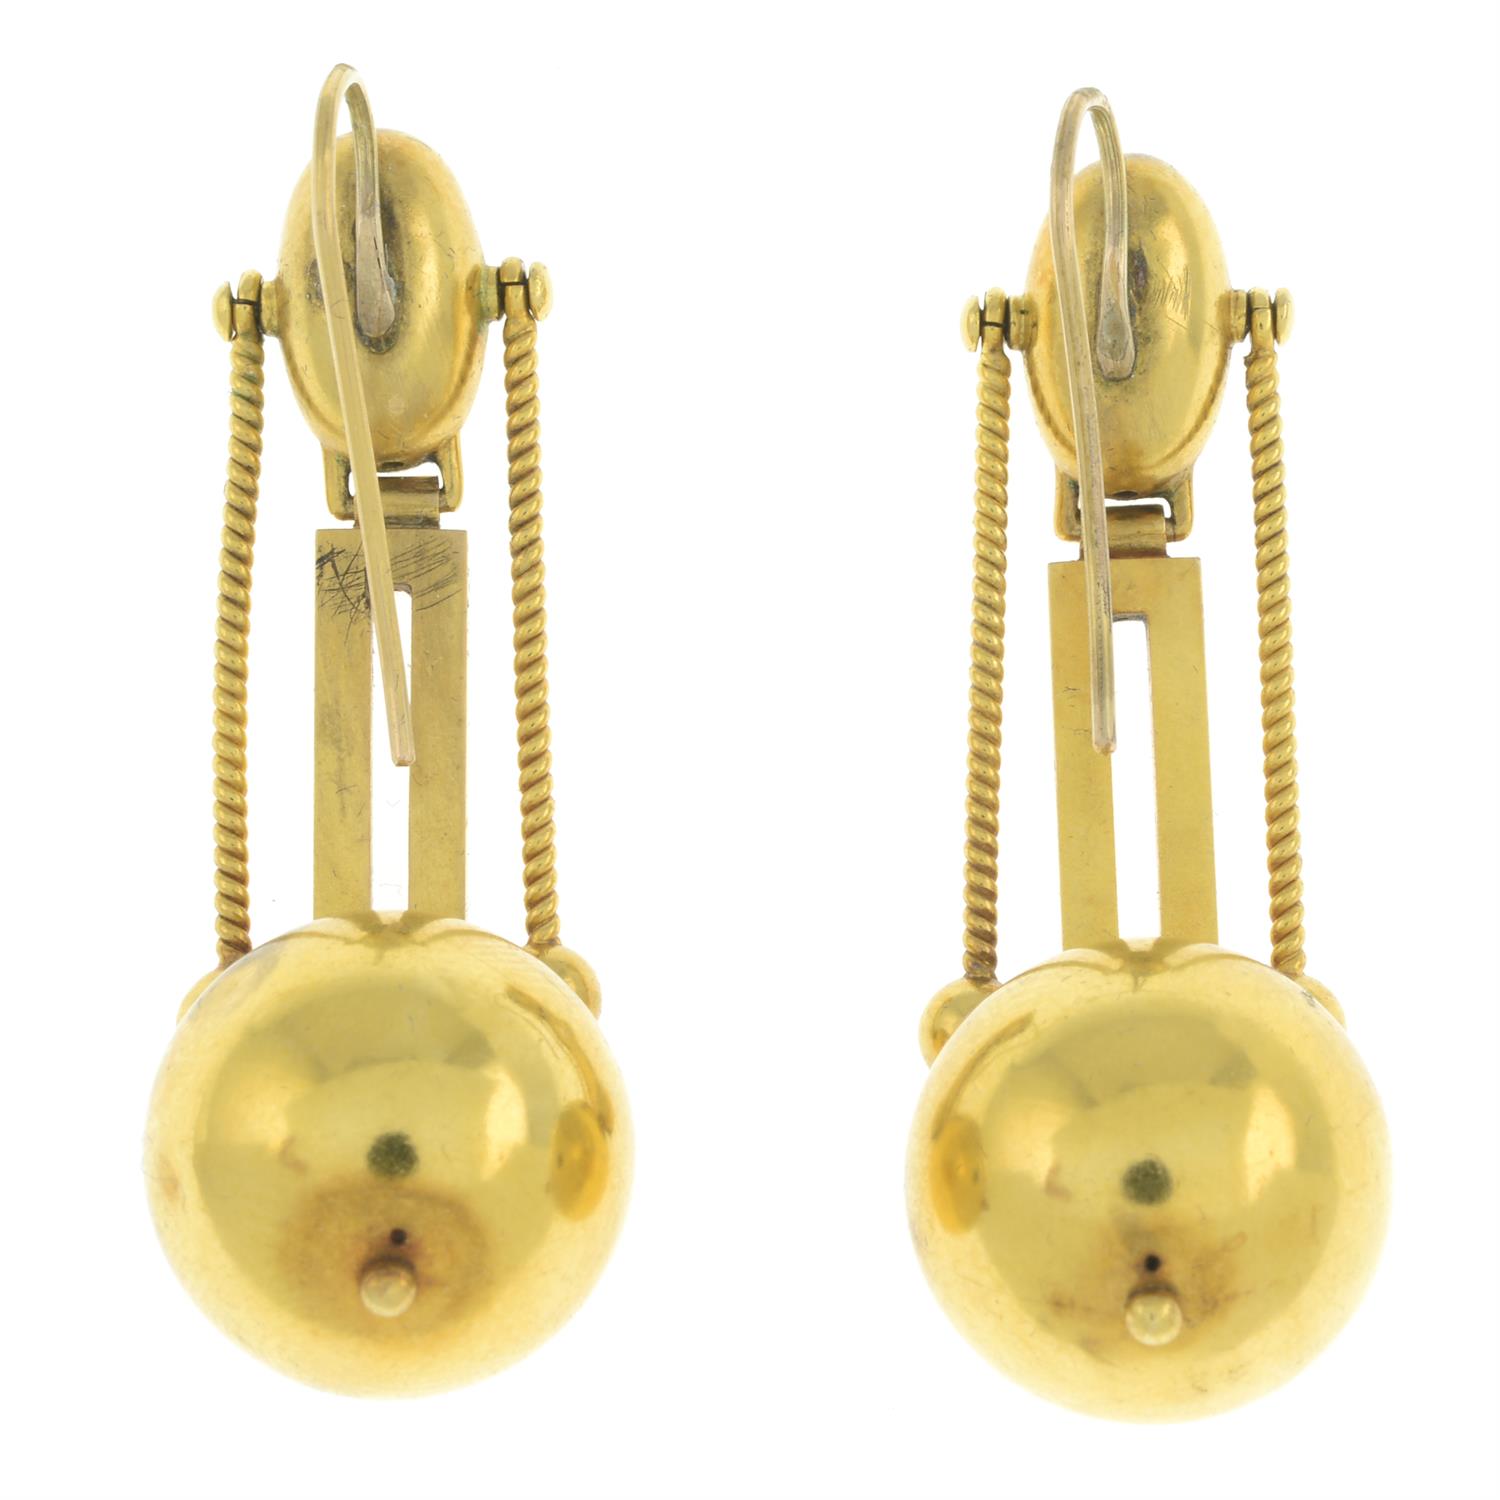 Victorian gold earrings - Image 3 of 7